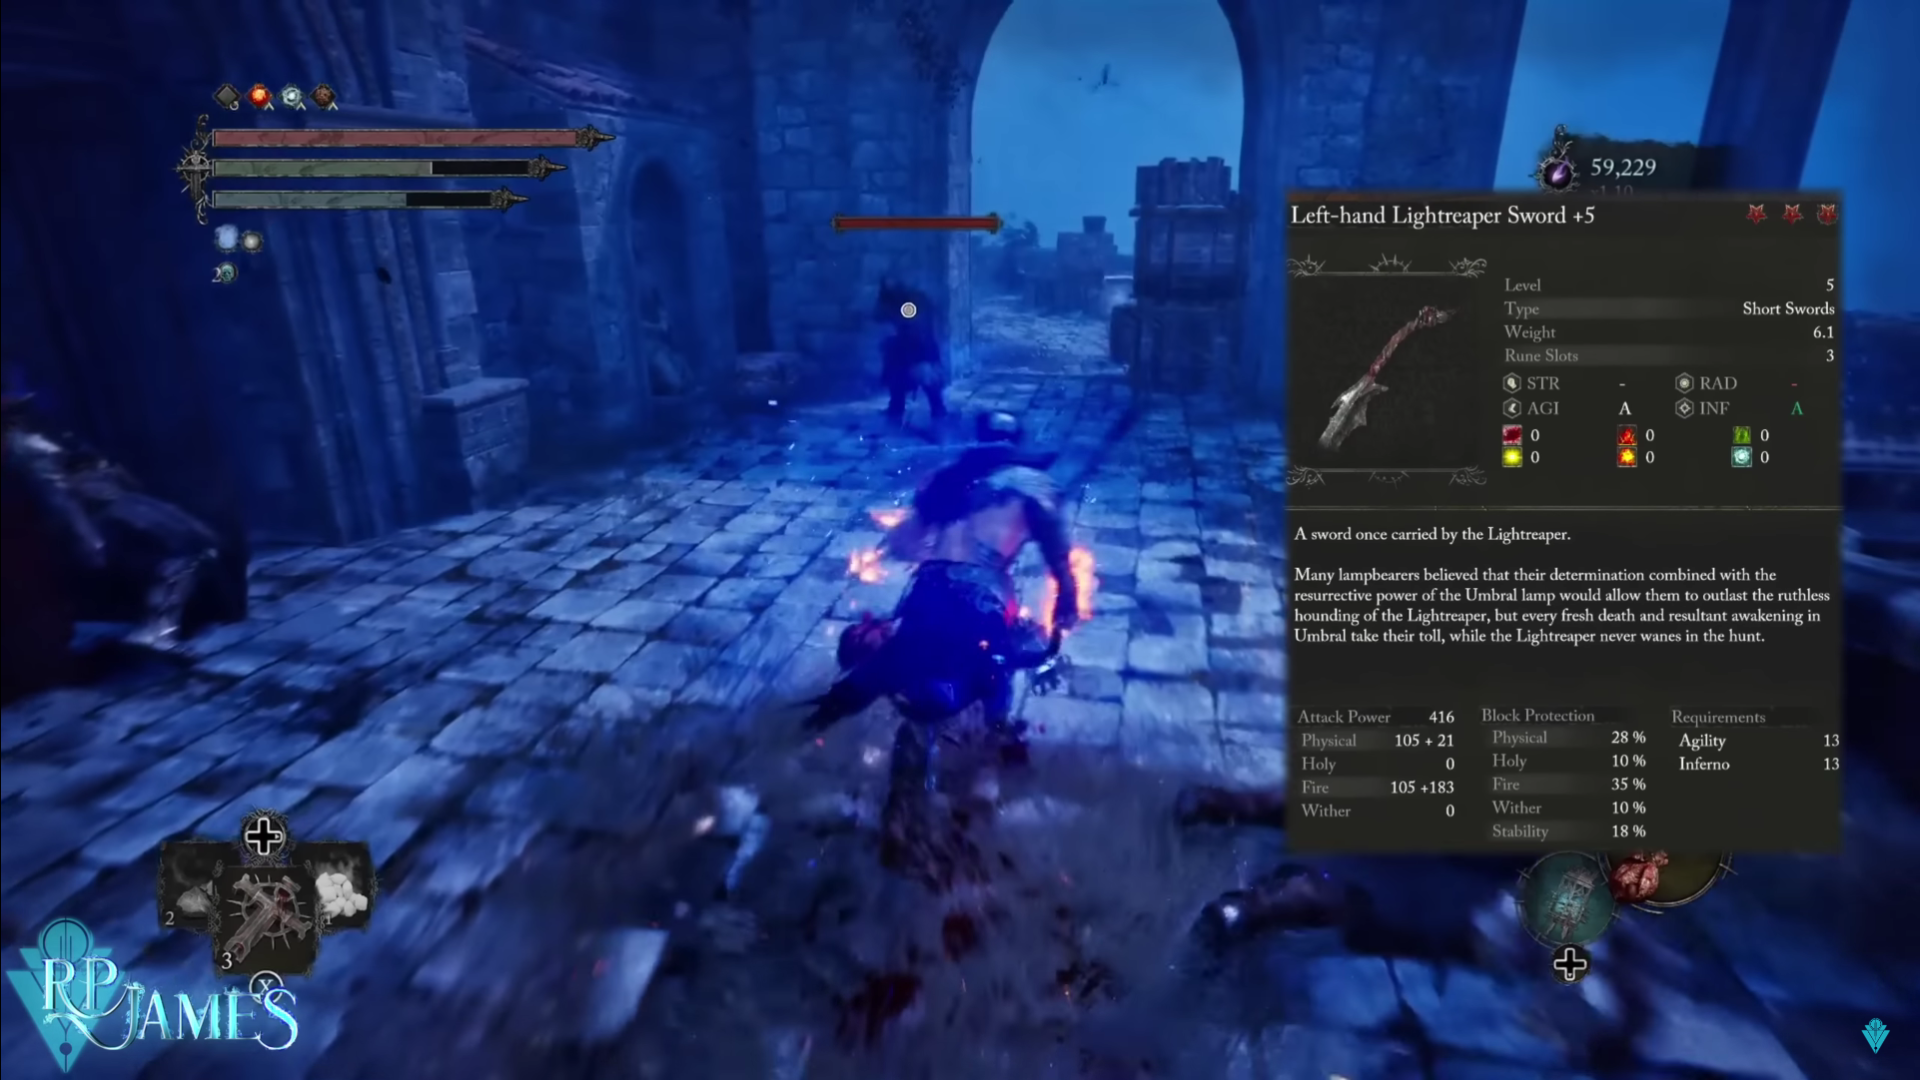 A screenshot of the left-land Lightreaper Sword in Lords of the Fallen.